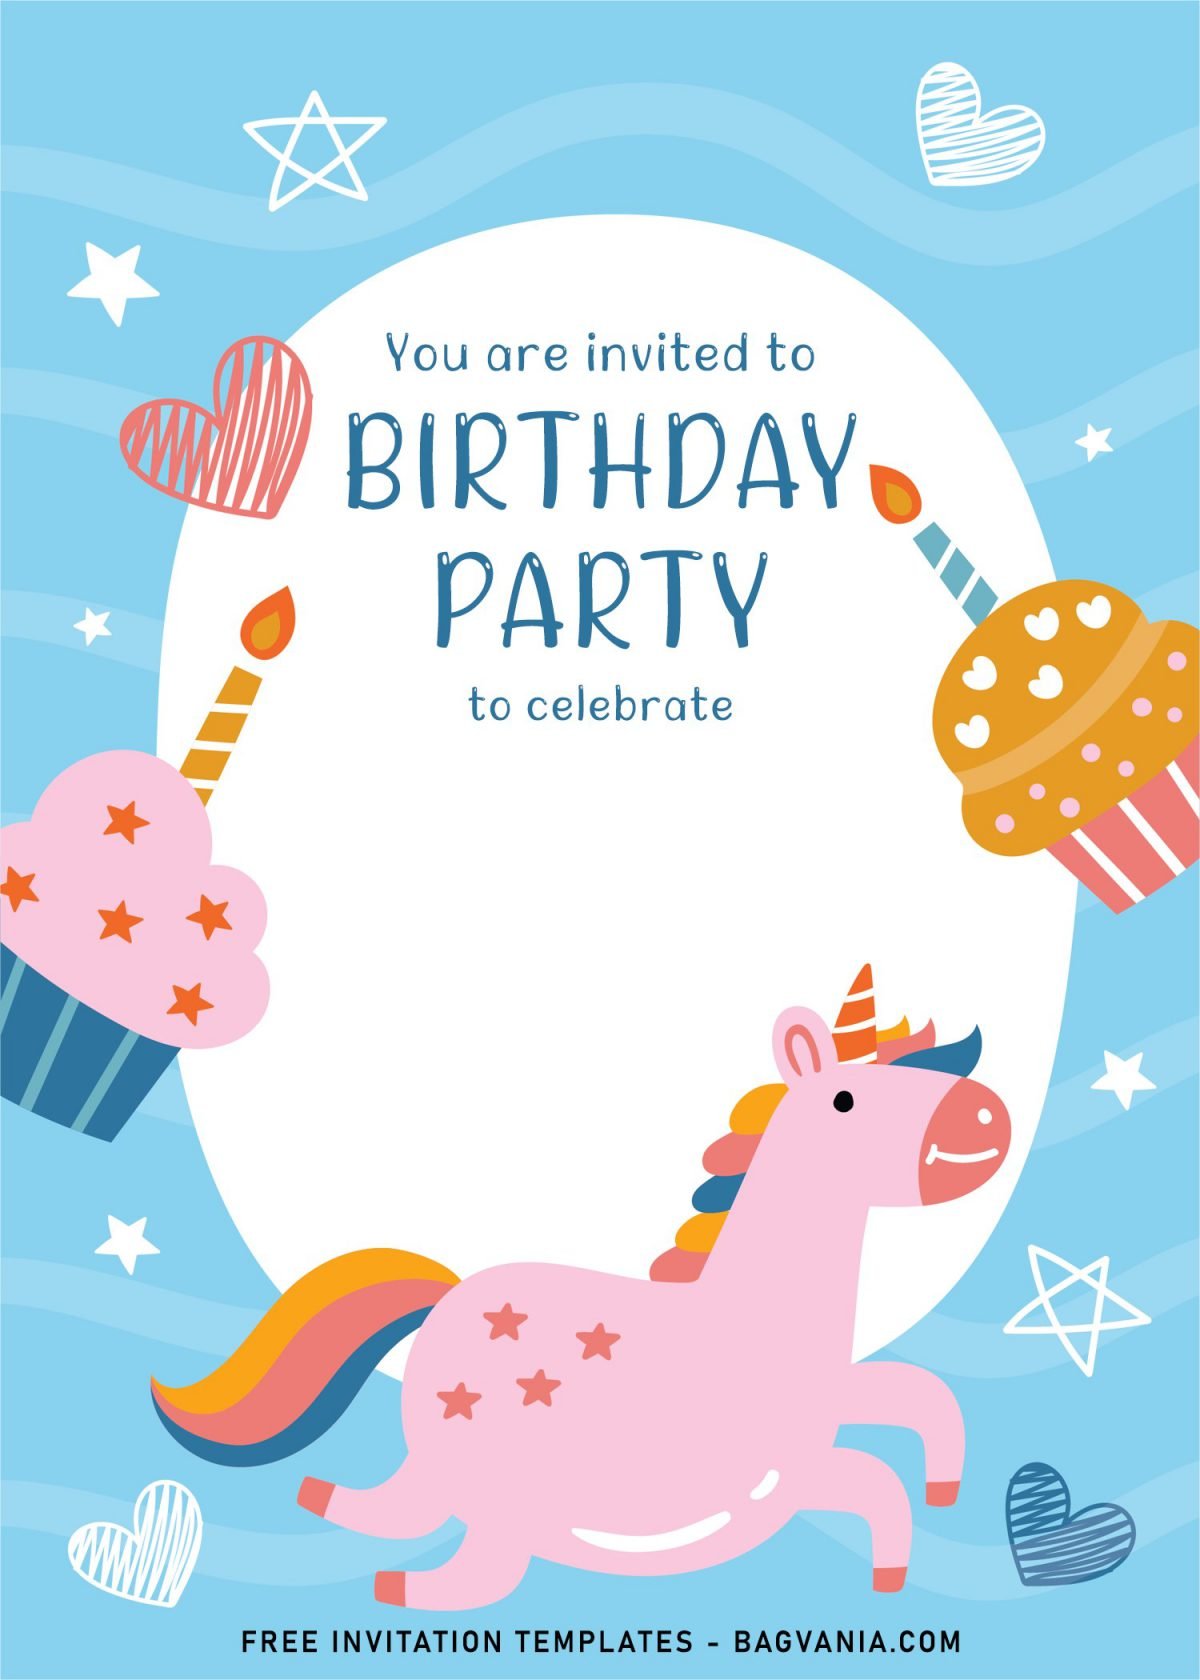 7+ Cute And Fun Birthday Invitation Templates For Kids Birthday Party and has Magical Unicorn with rainbow tail